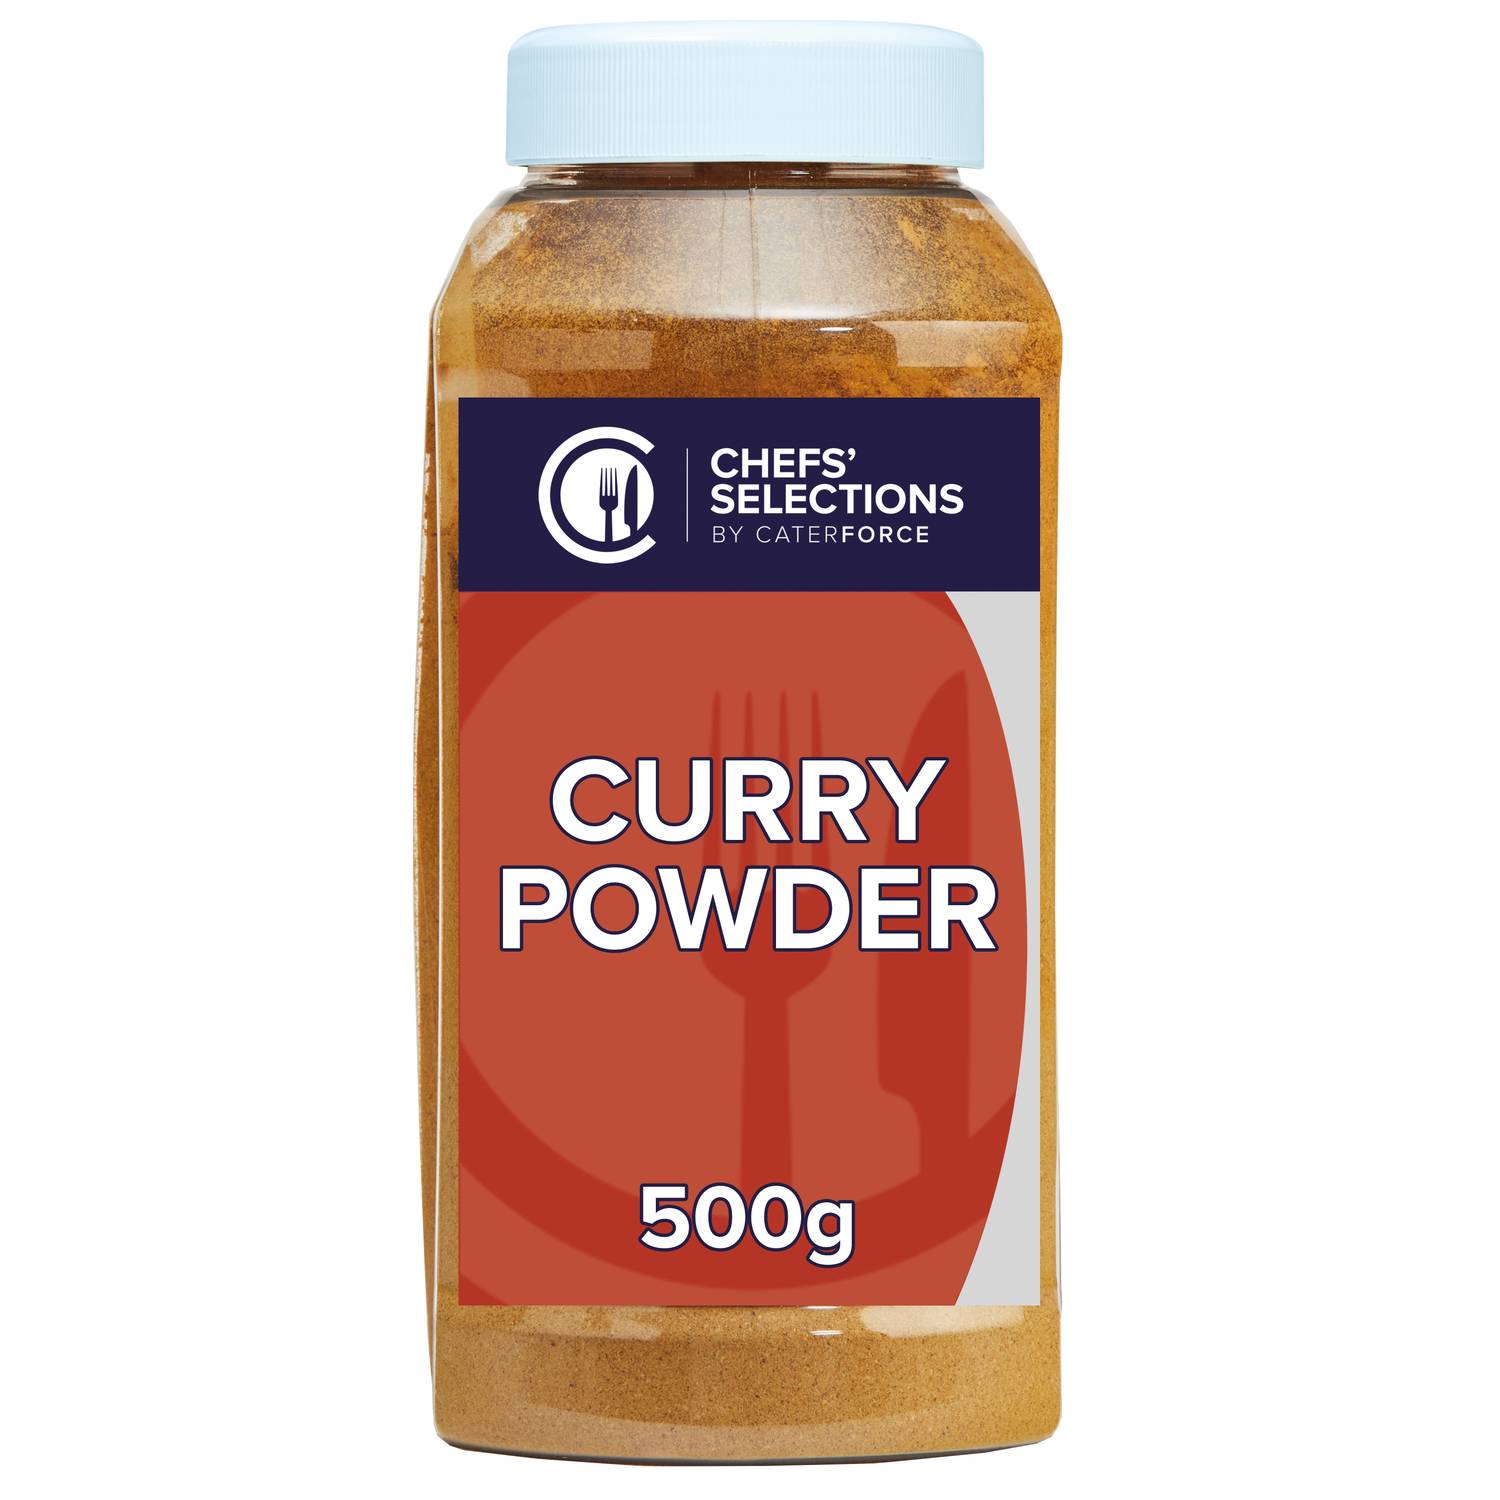 Chefs’ Selections Curry Powder (6 x 500g)